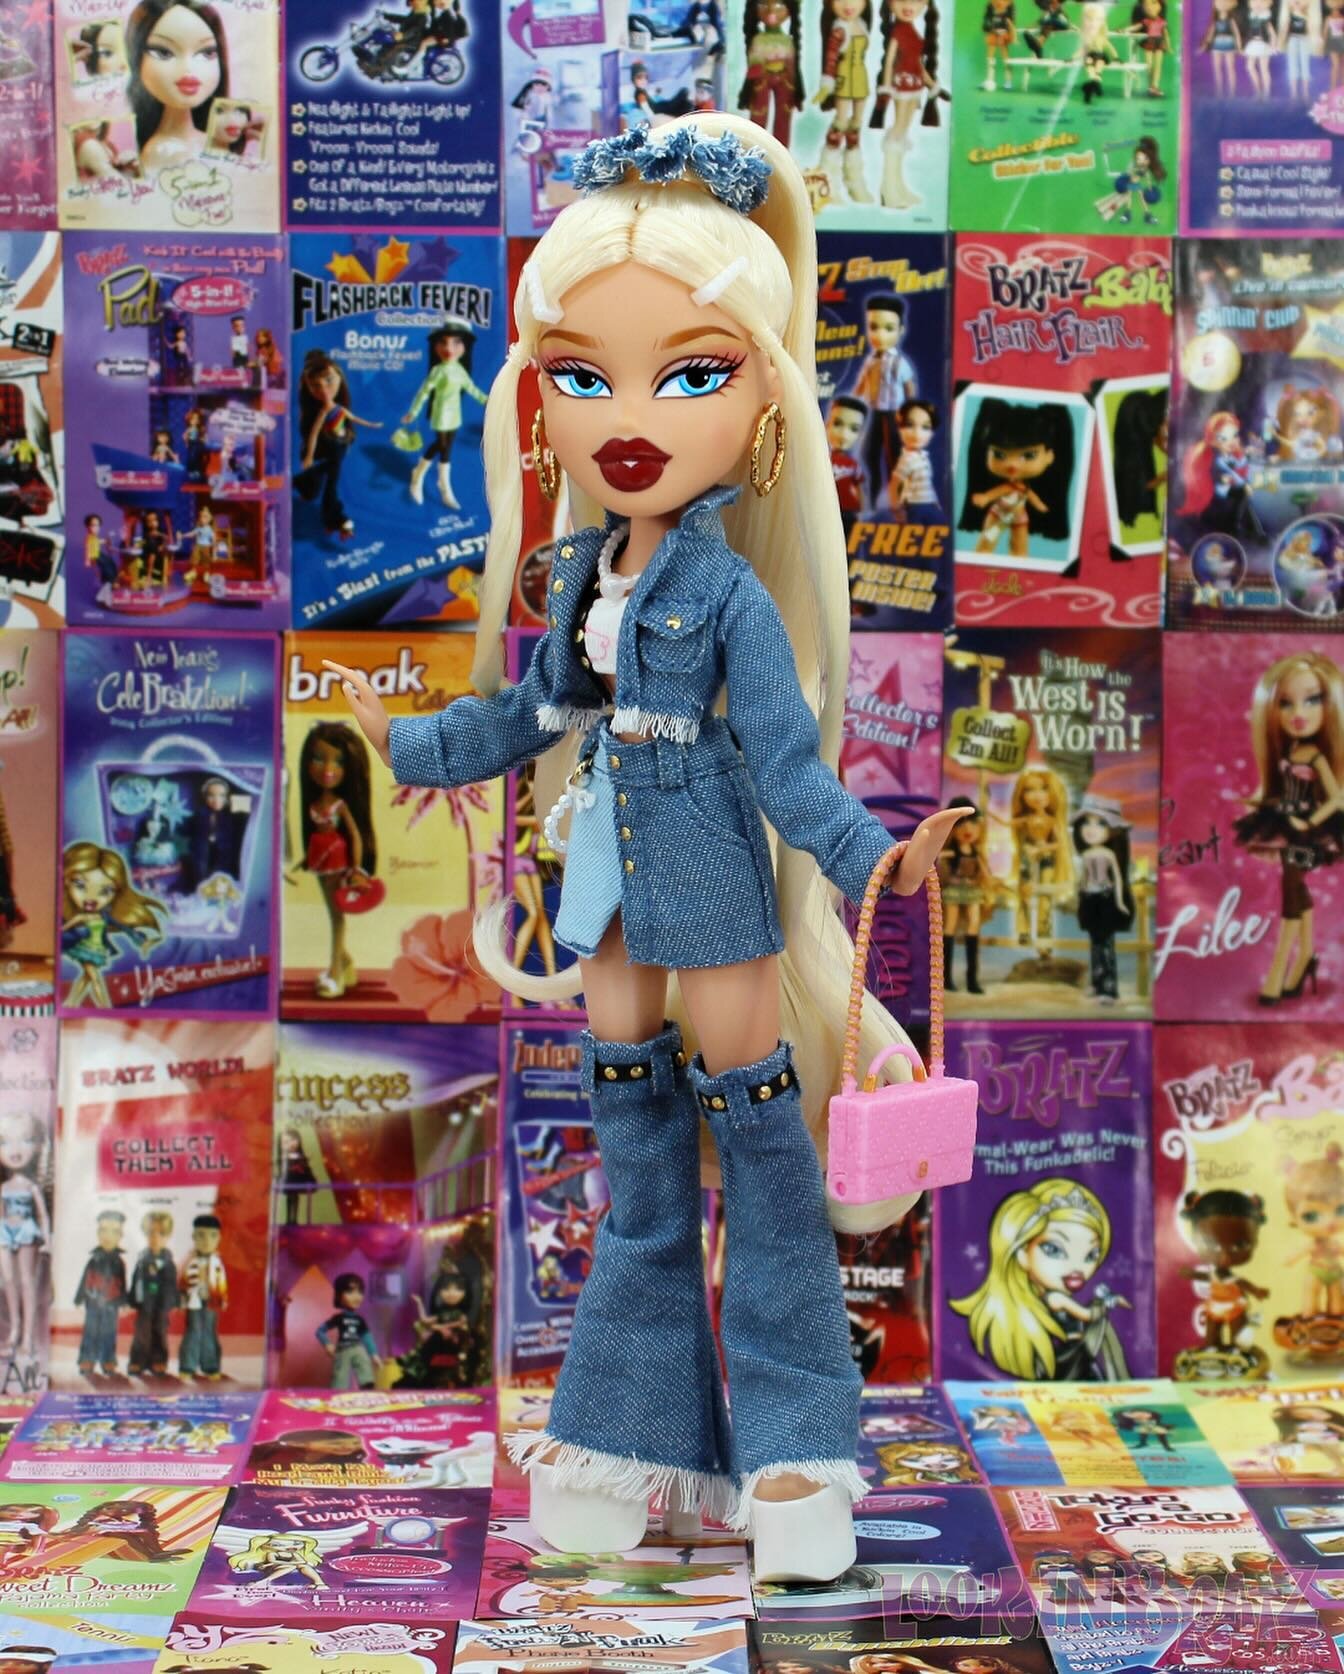 Boy, I&rsquo;ll let you be my Levi&rsquo;s jeans so you can hug that Bratz all day long! 👖

Want to learn more about the Alwayz Bratz dolls, including info on where to buy, variants, and more? Read the detailed review now at LookinBratz.com, plus wa